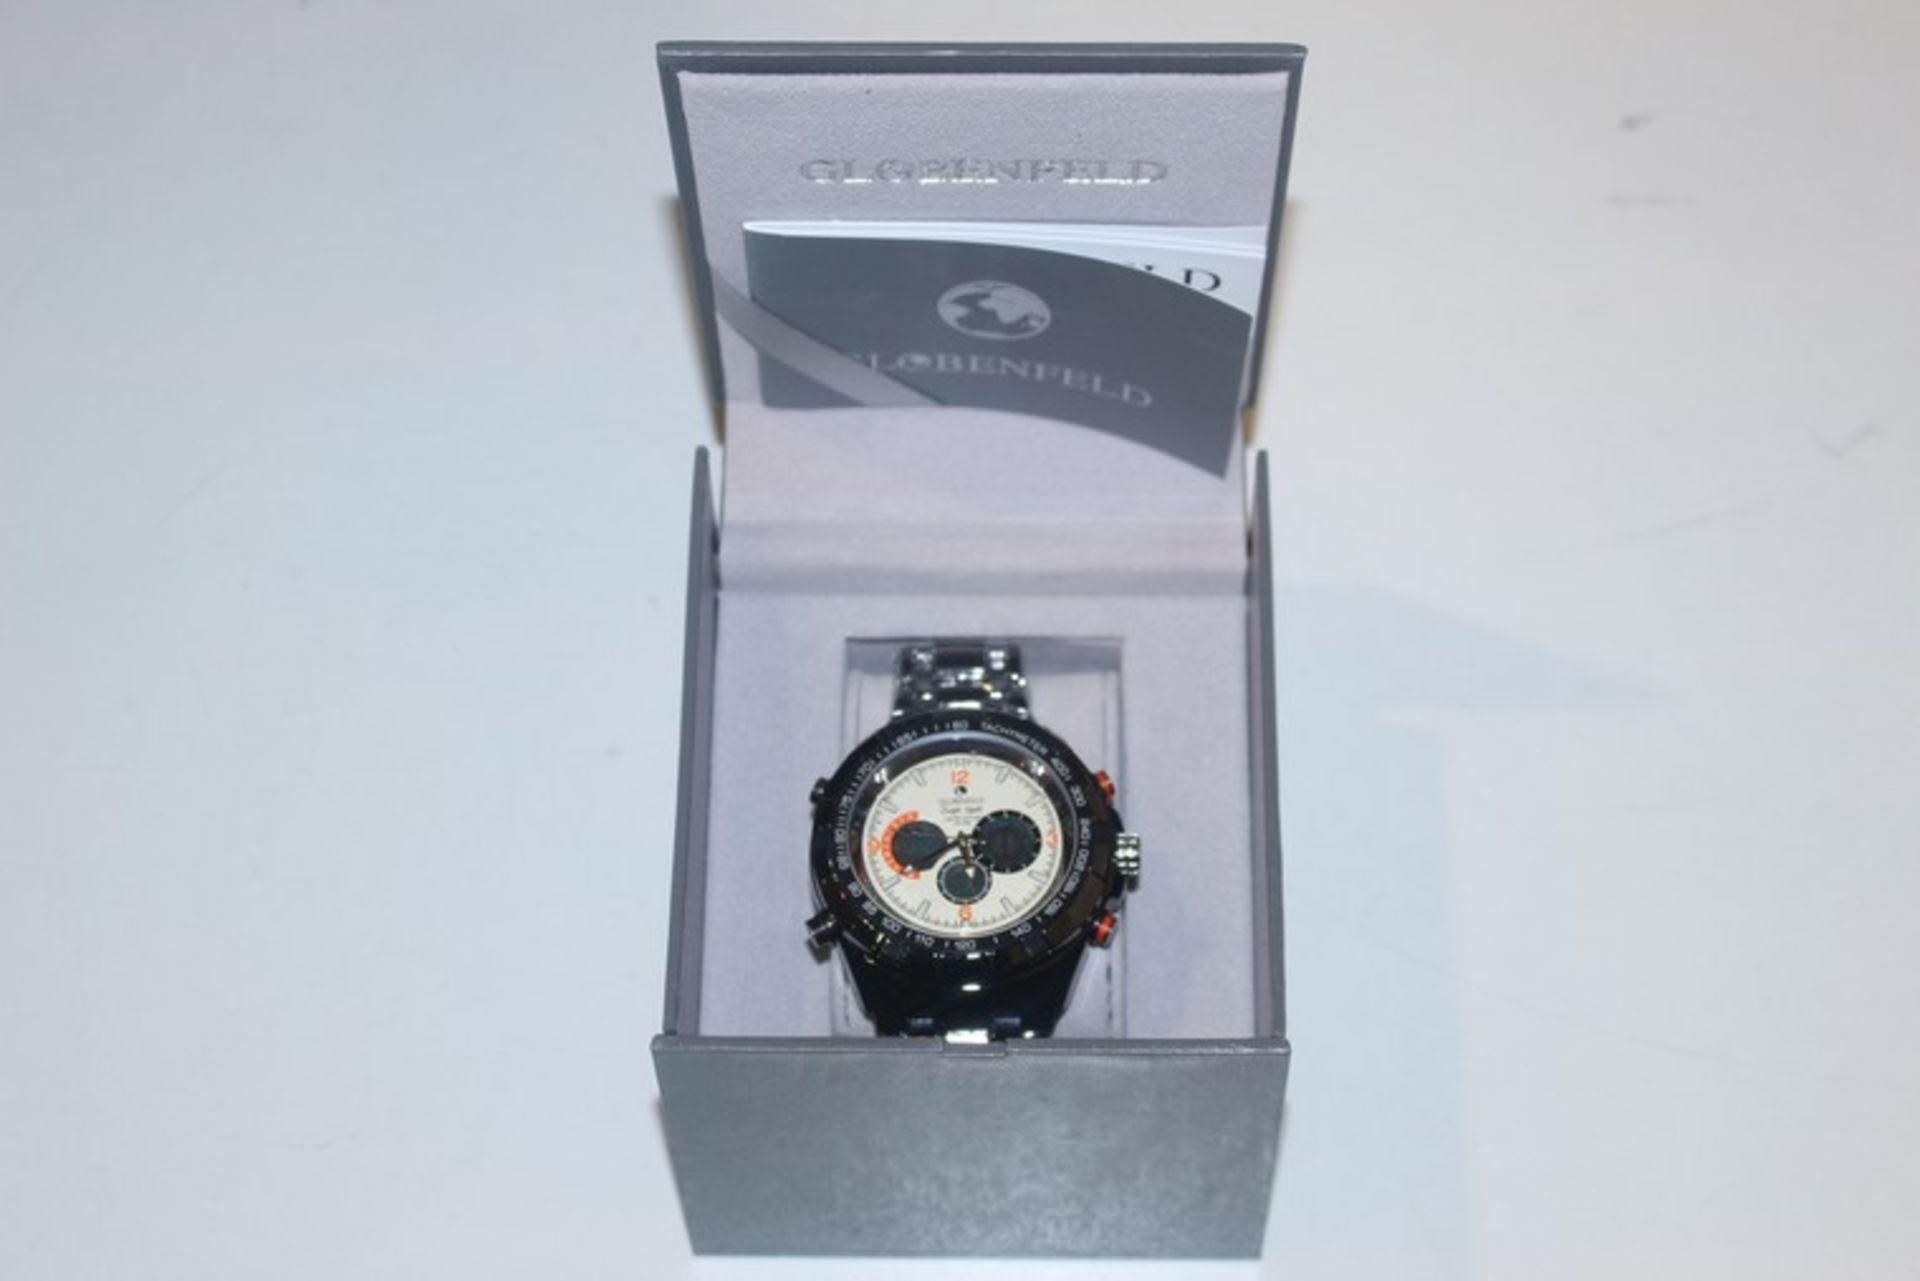 1 x BOXED BRAND NEW GLOBENFIELD MENS DESIGNER WRIST WATCH RRP £400 *PLEASE NOTE THAT THE BID PRICE